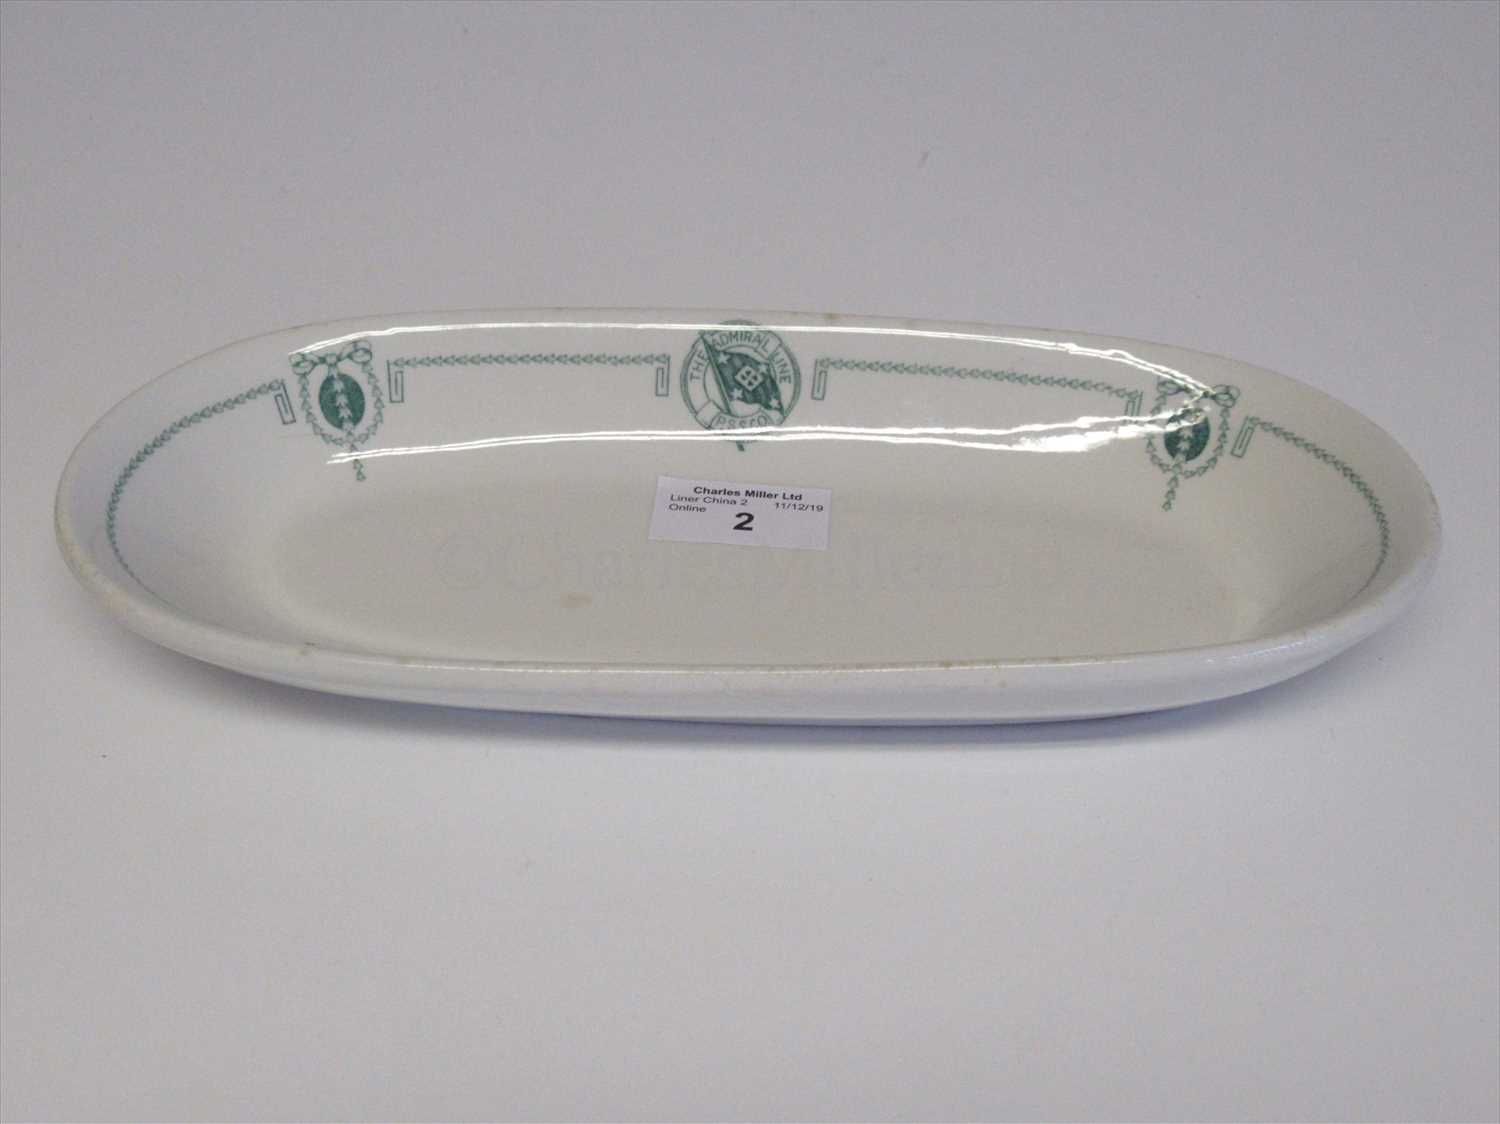 Lot 2 - Admiral Line P.S.S. Co: An oval plate